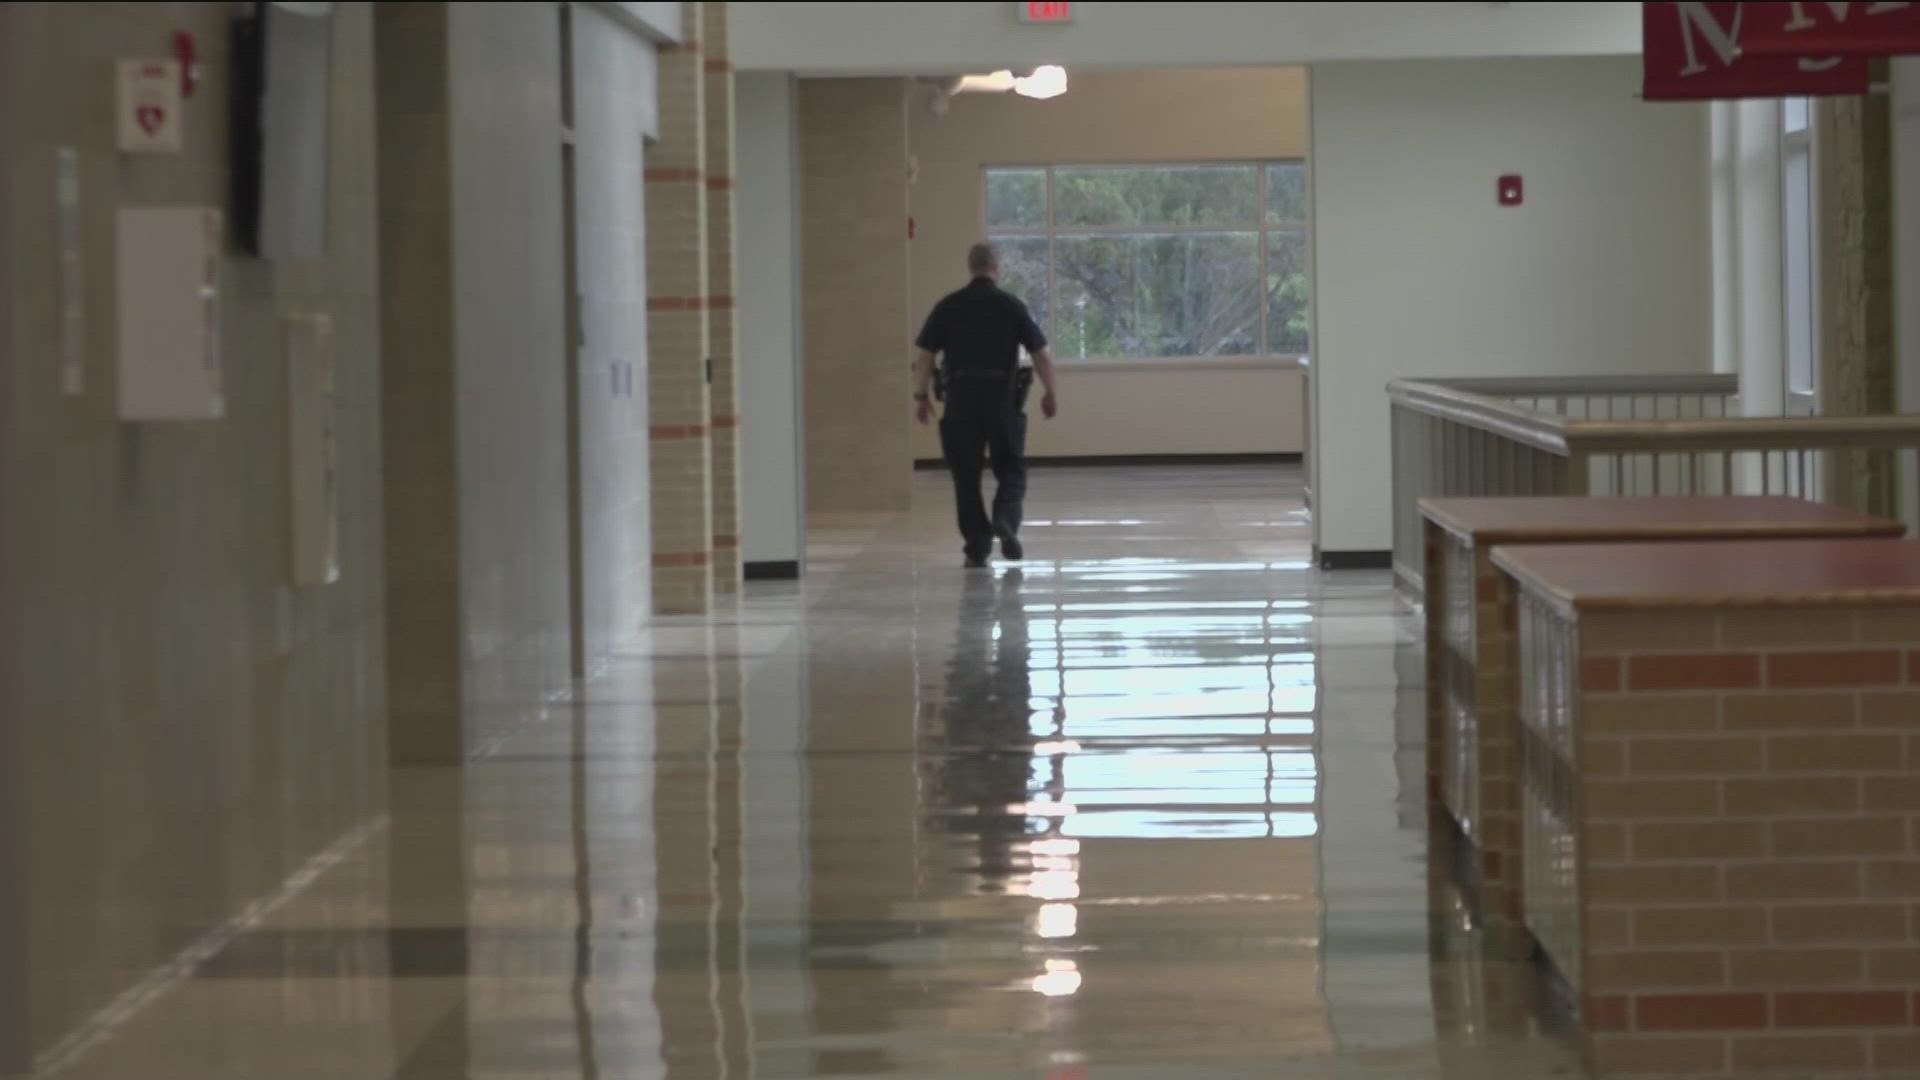 As more Central Texas students return to the classroom, the State and school districts are allocating funds to make campuses safer. But will it make a difference?